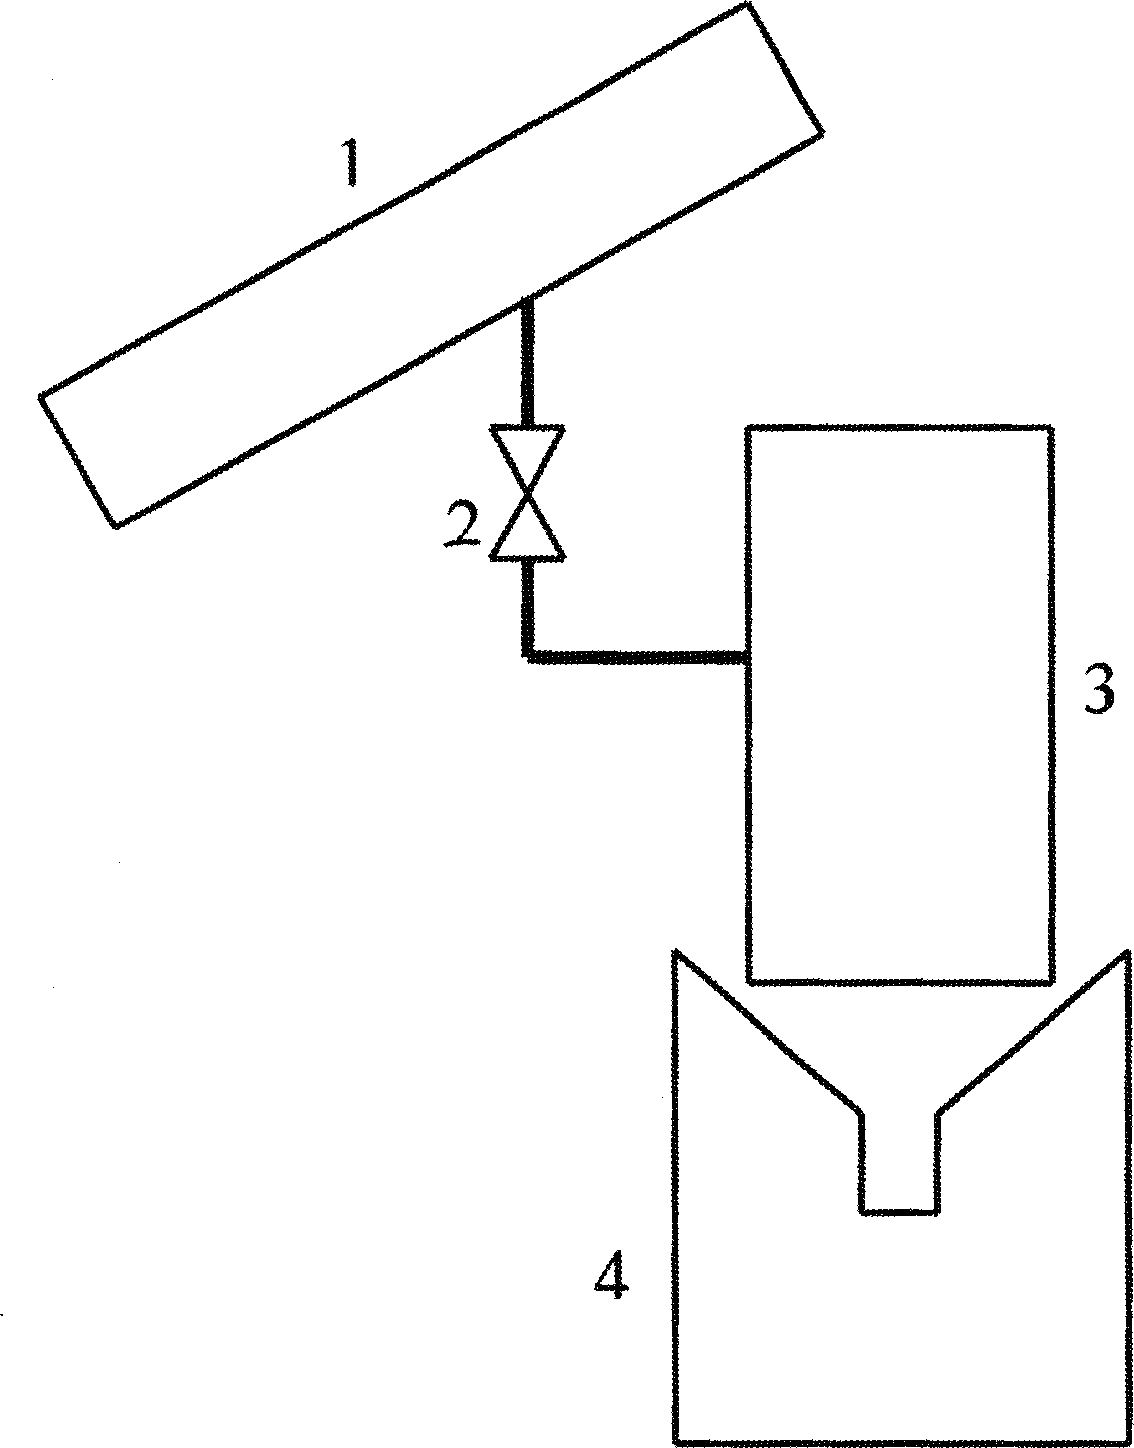 Apparatus for water production from air by employing solar-powered intermittent absorption refrigeration